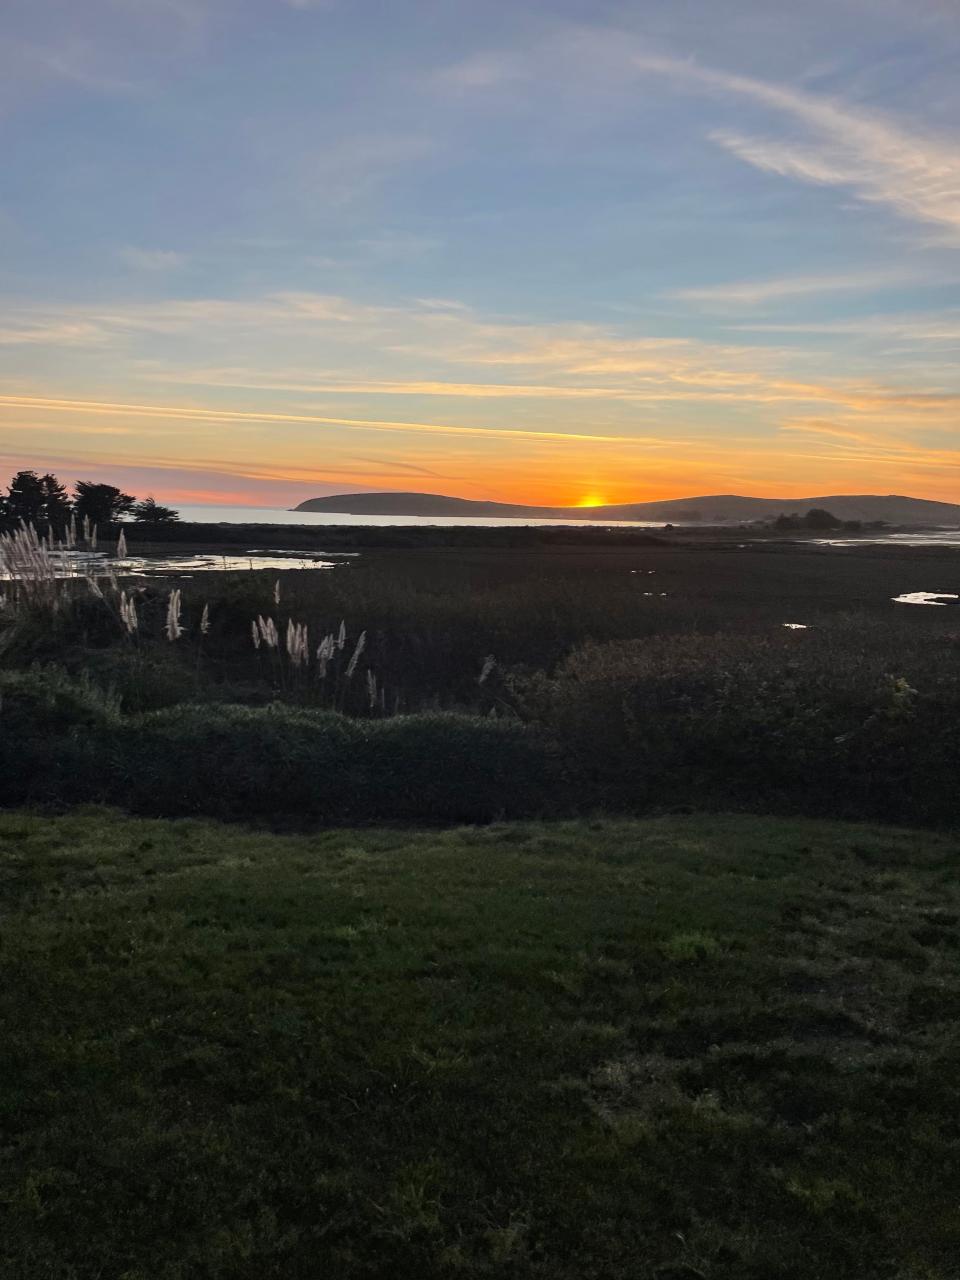 The Lodge at Bodega Bay is situated perfectly for unparalleled views of the sunset.